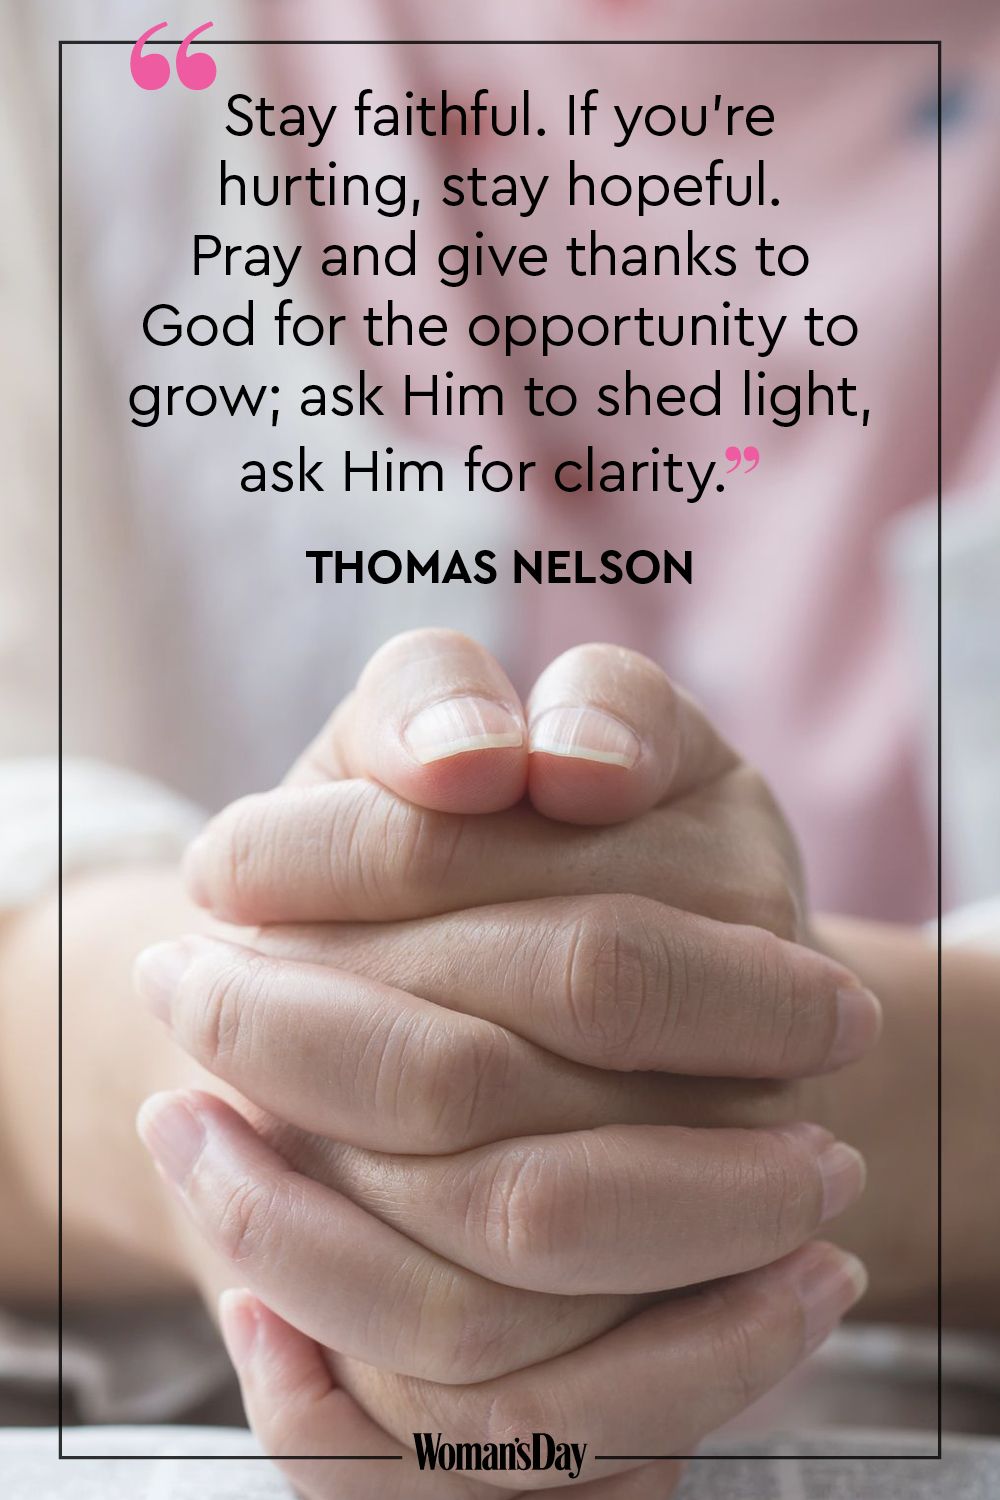 16 Prayer Quotes — Quotes About Prayer